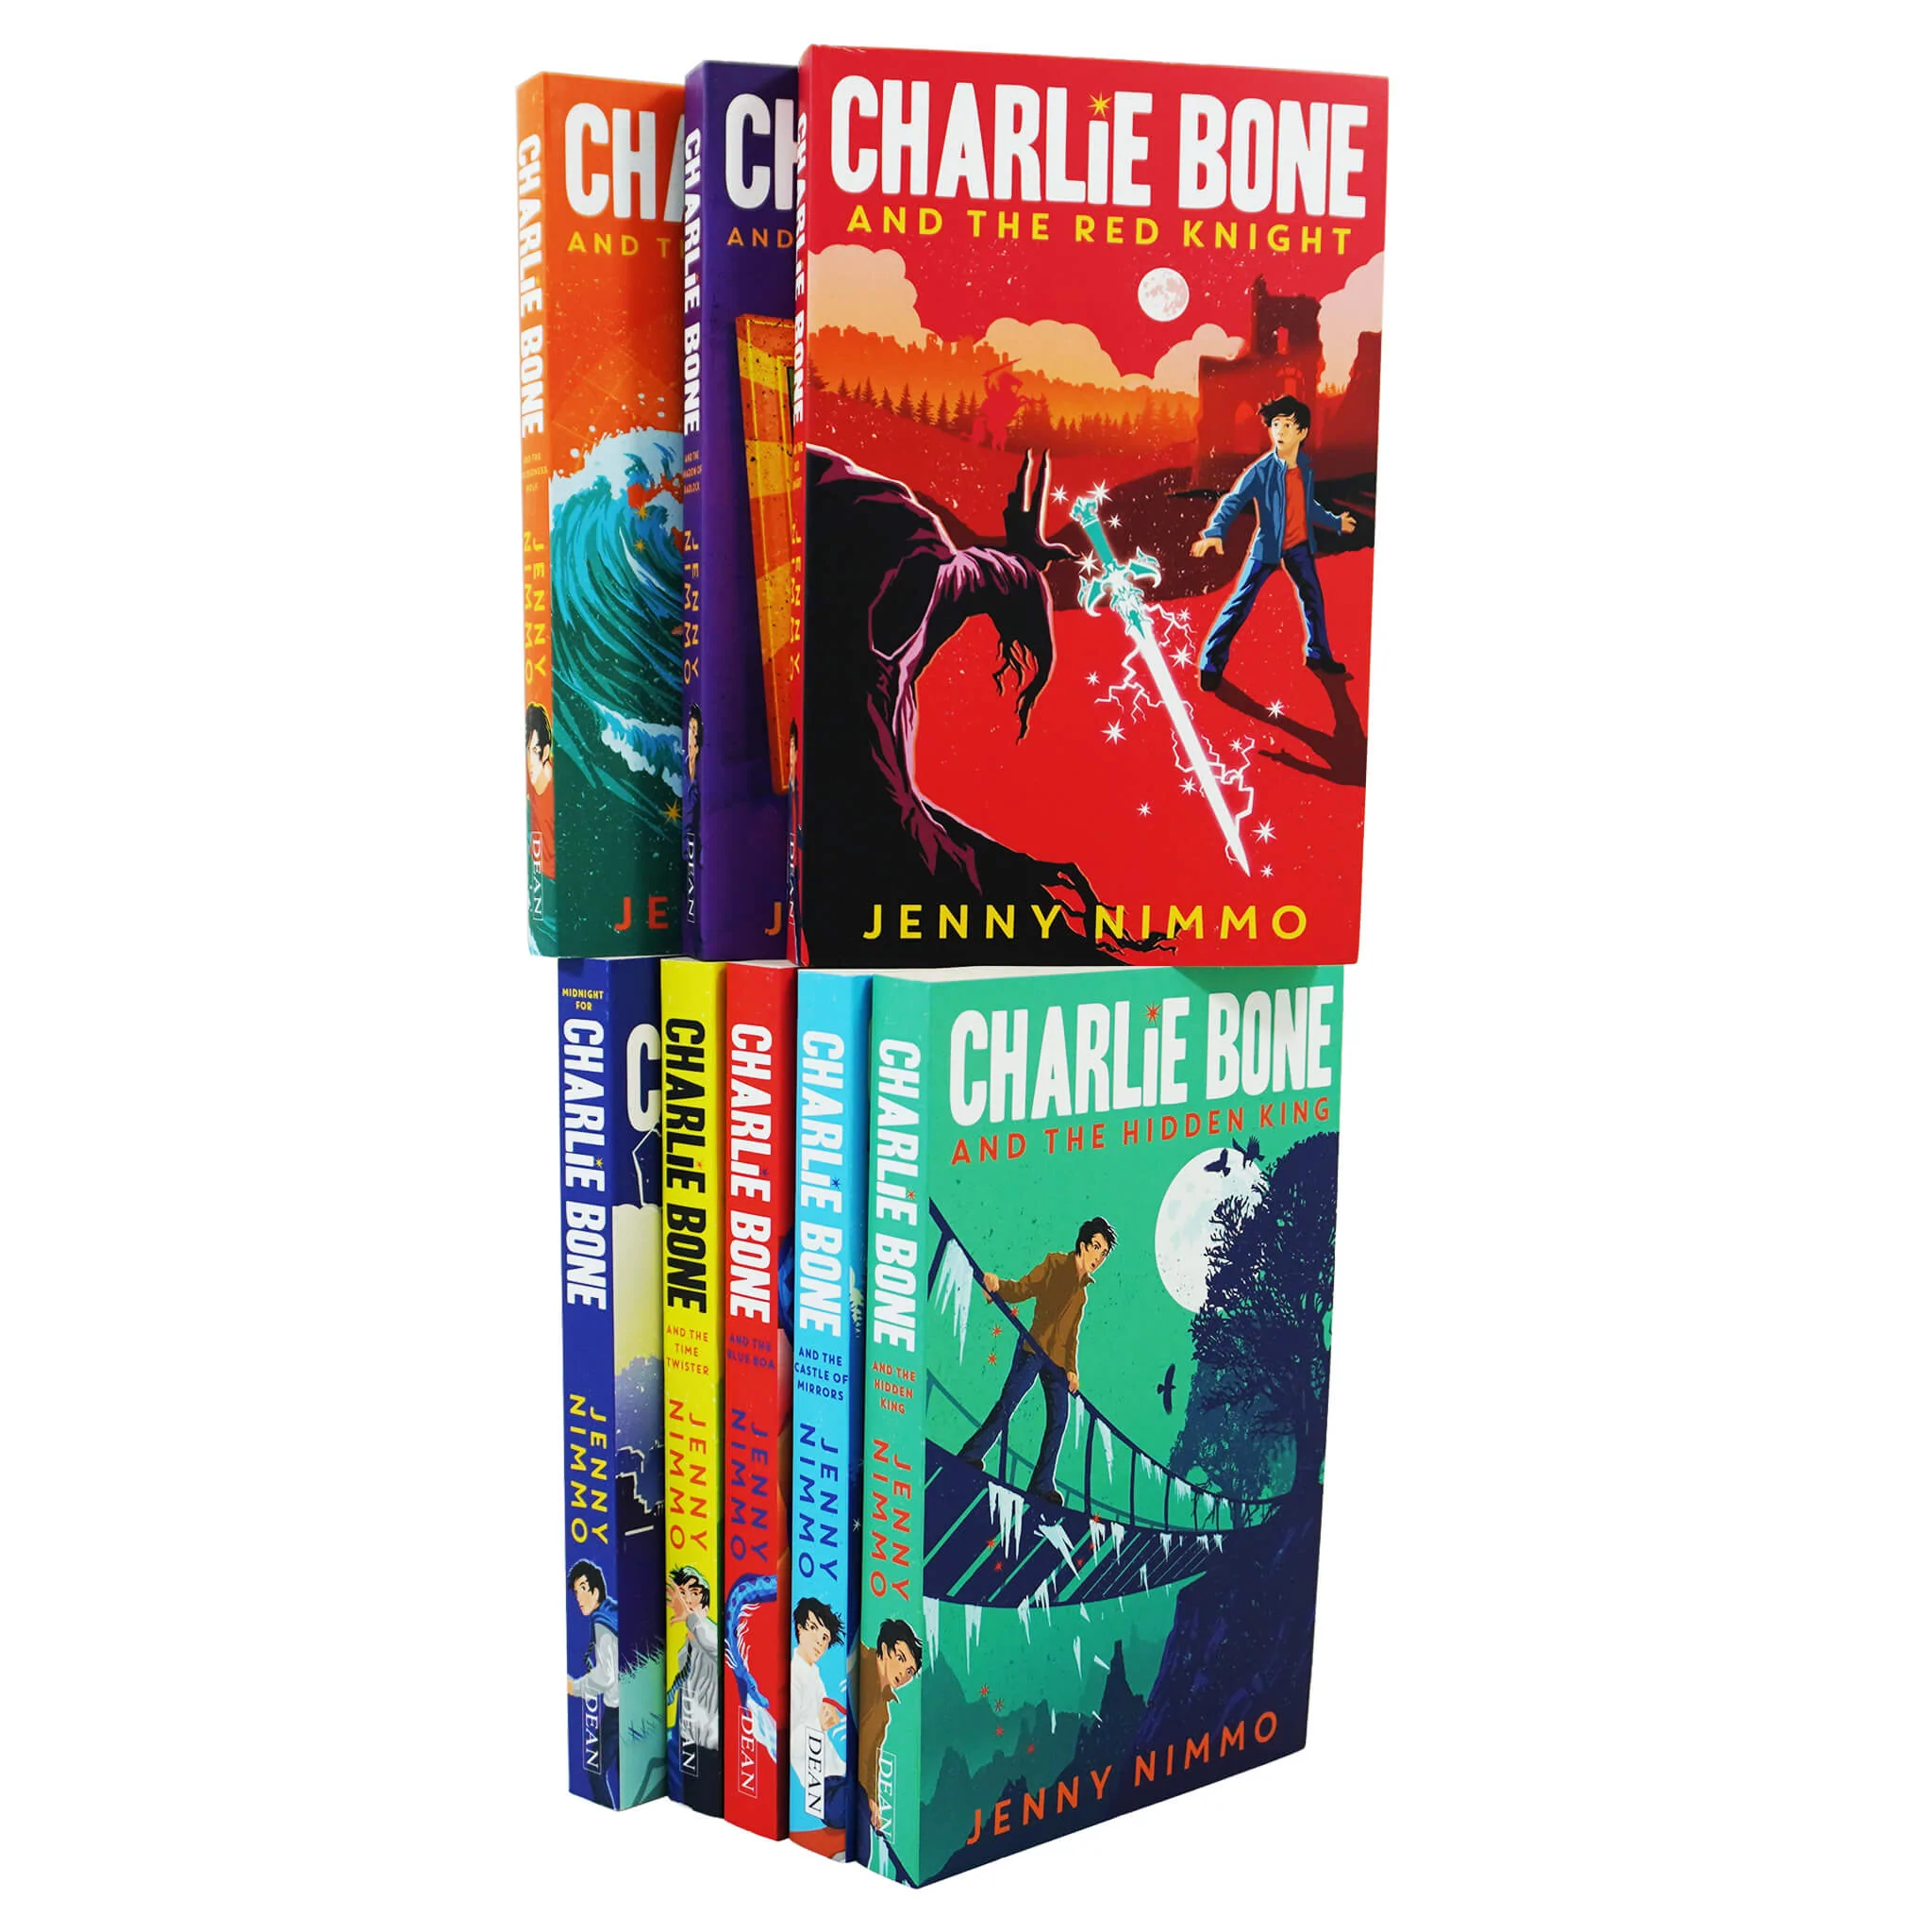 Charlie Bone Collection 8 Books Set By Jenny Nimmo The Time Twister The Blue Boa The Hidden King The Red Knight The Shadow Of Badlock